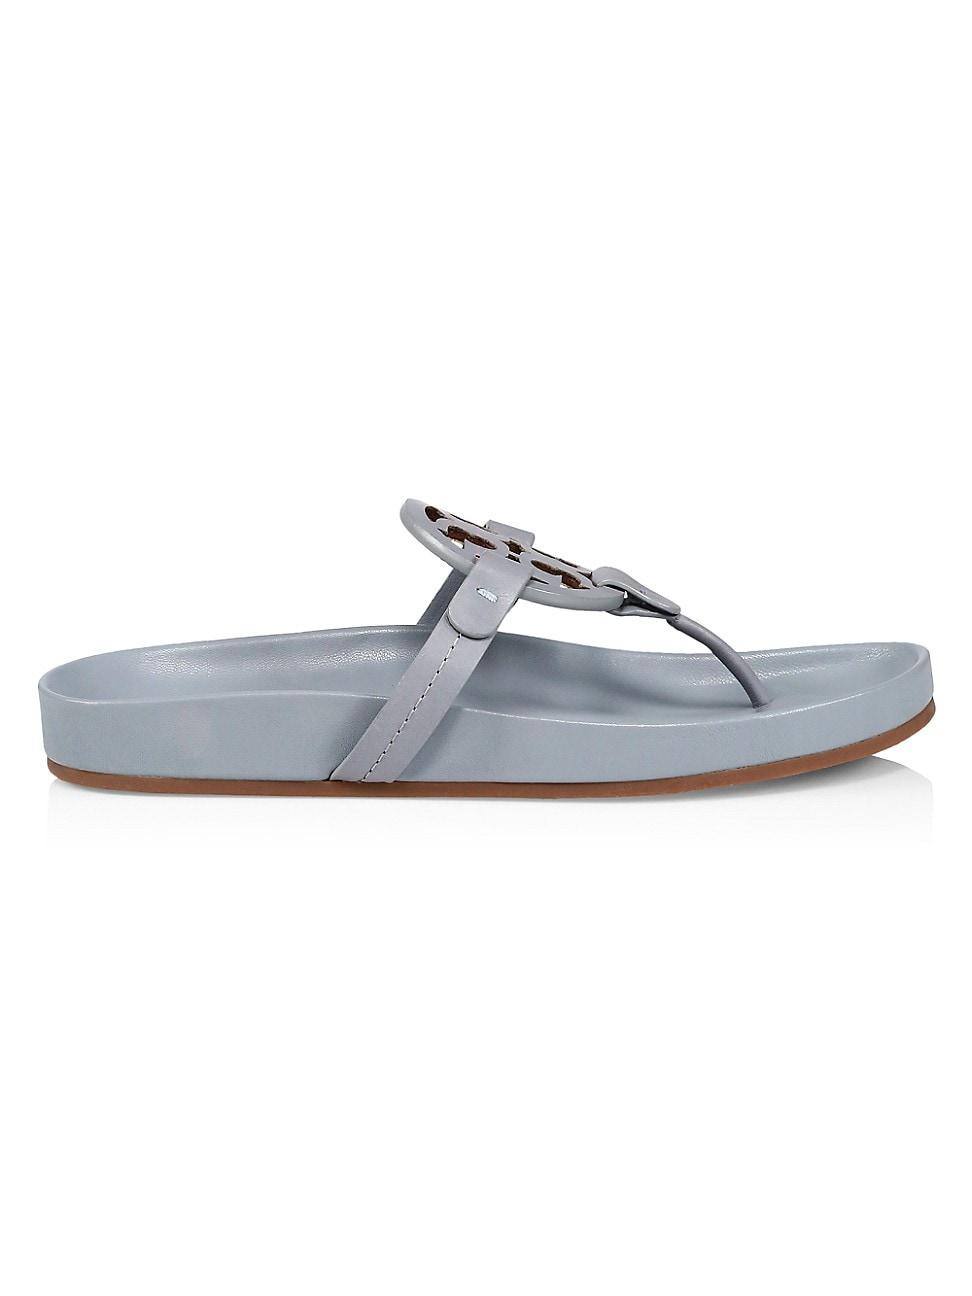 Tory Burch Miller Cloud Leather Thong Slides in Blue | Lyst